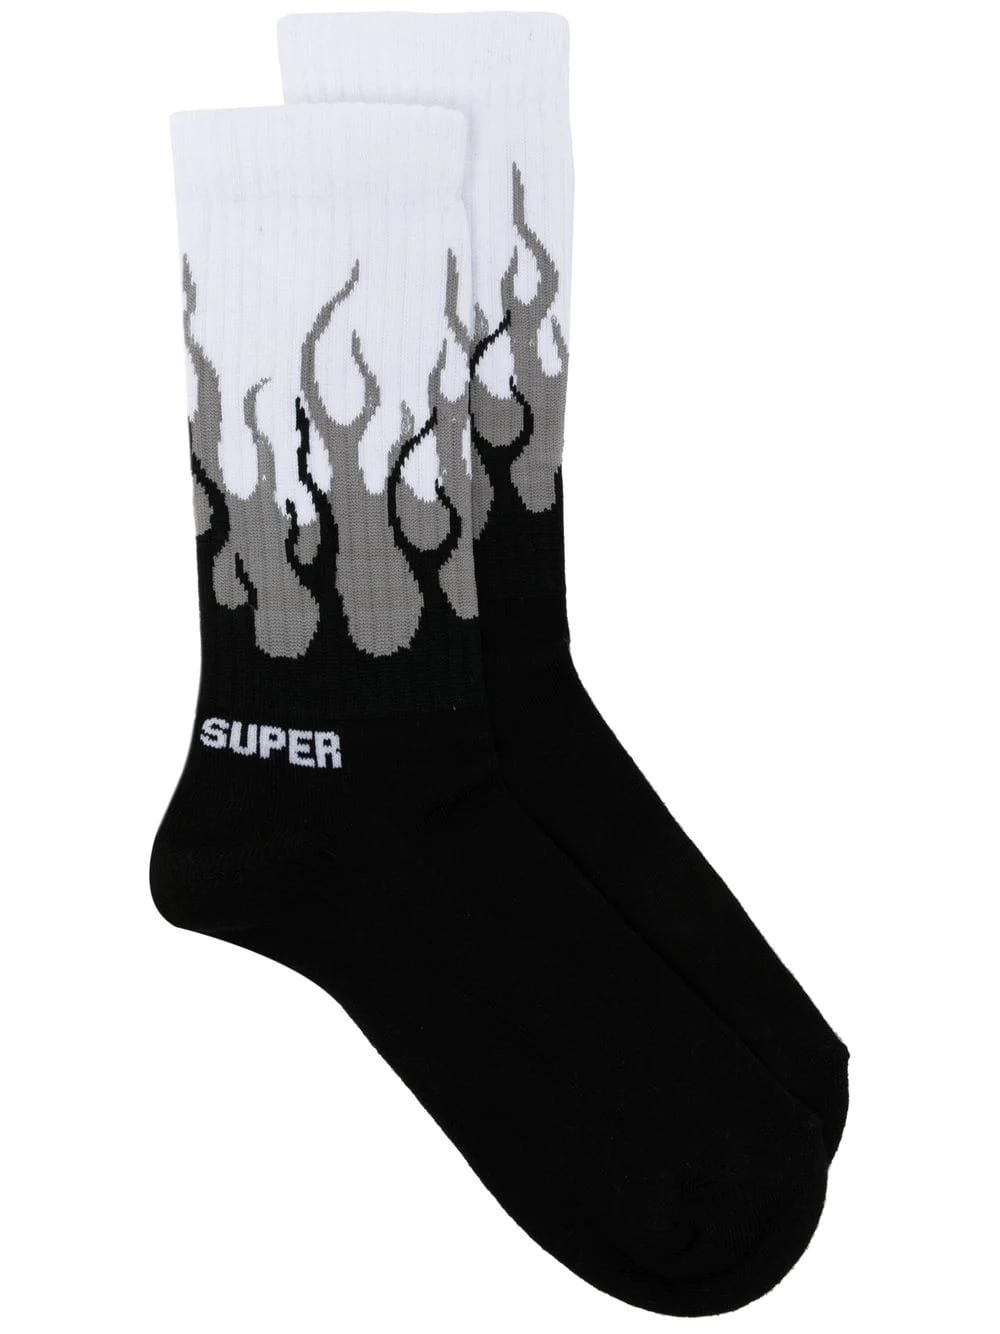 Vision of Super Unisex Grey Double Flame Socks